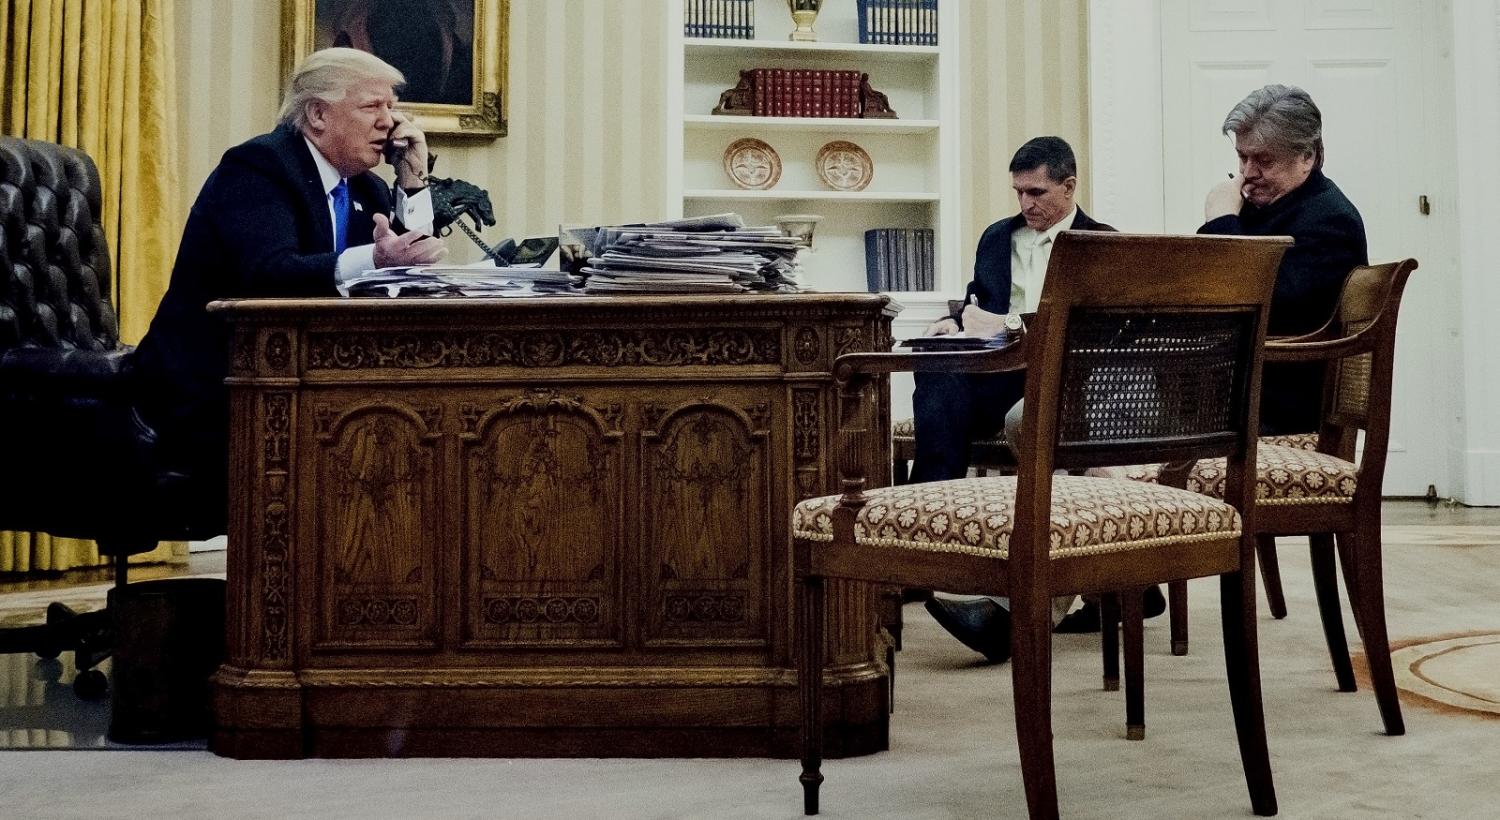 US President Donald Trump on the phone with Malcolm Turnbull on 28 January 2017 (Photo: Pete Marovich/Getty)